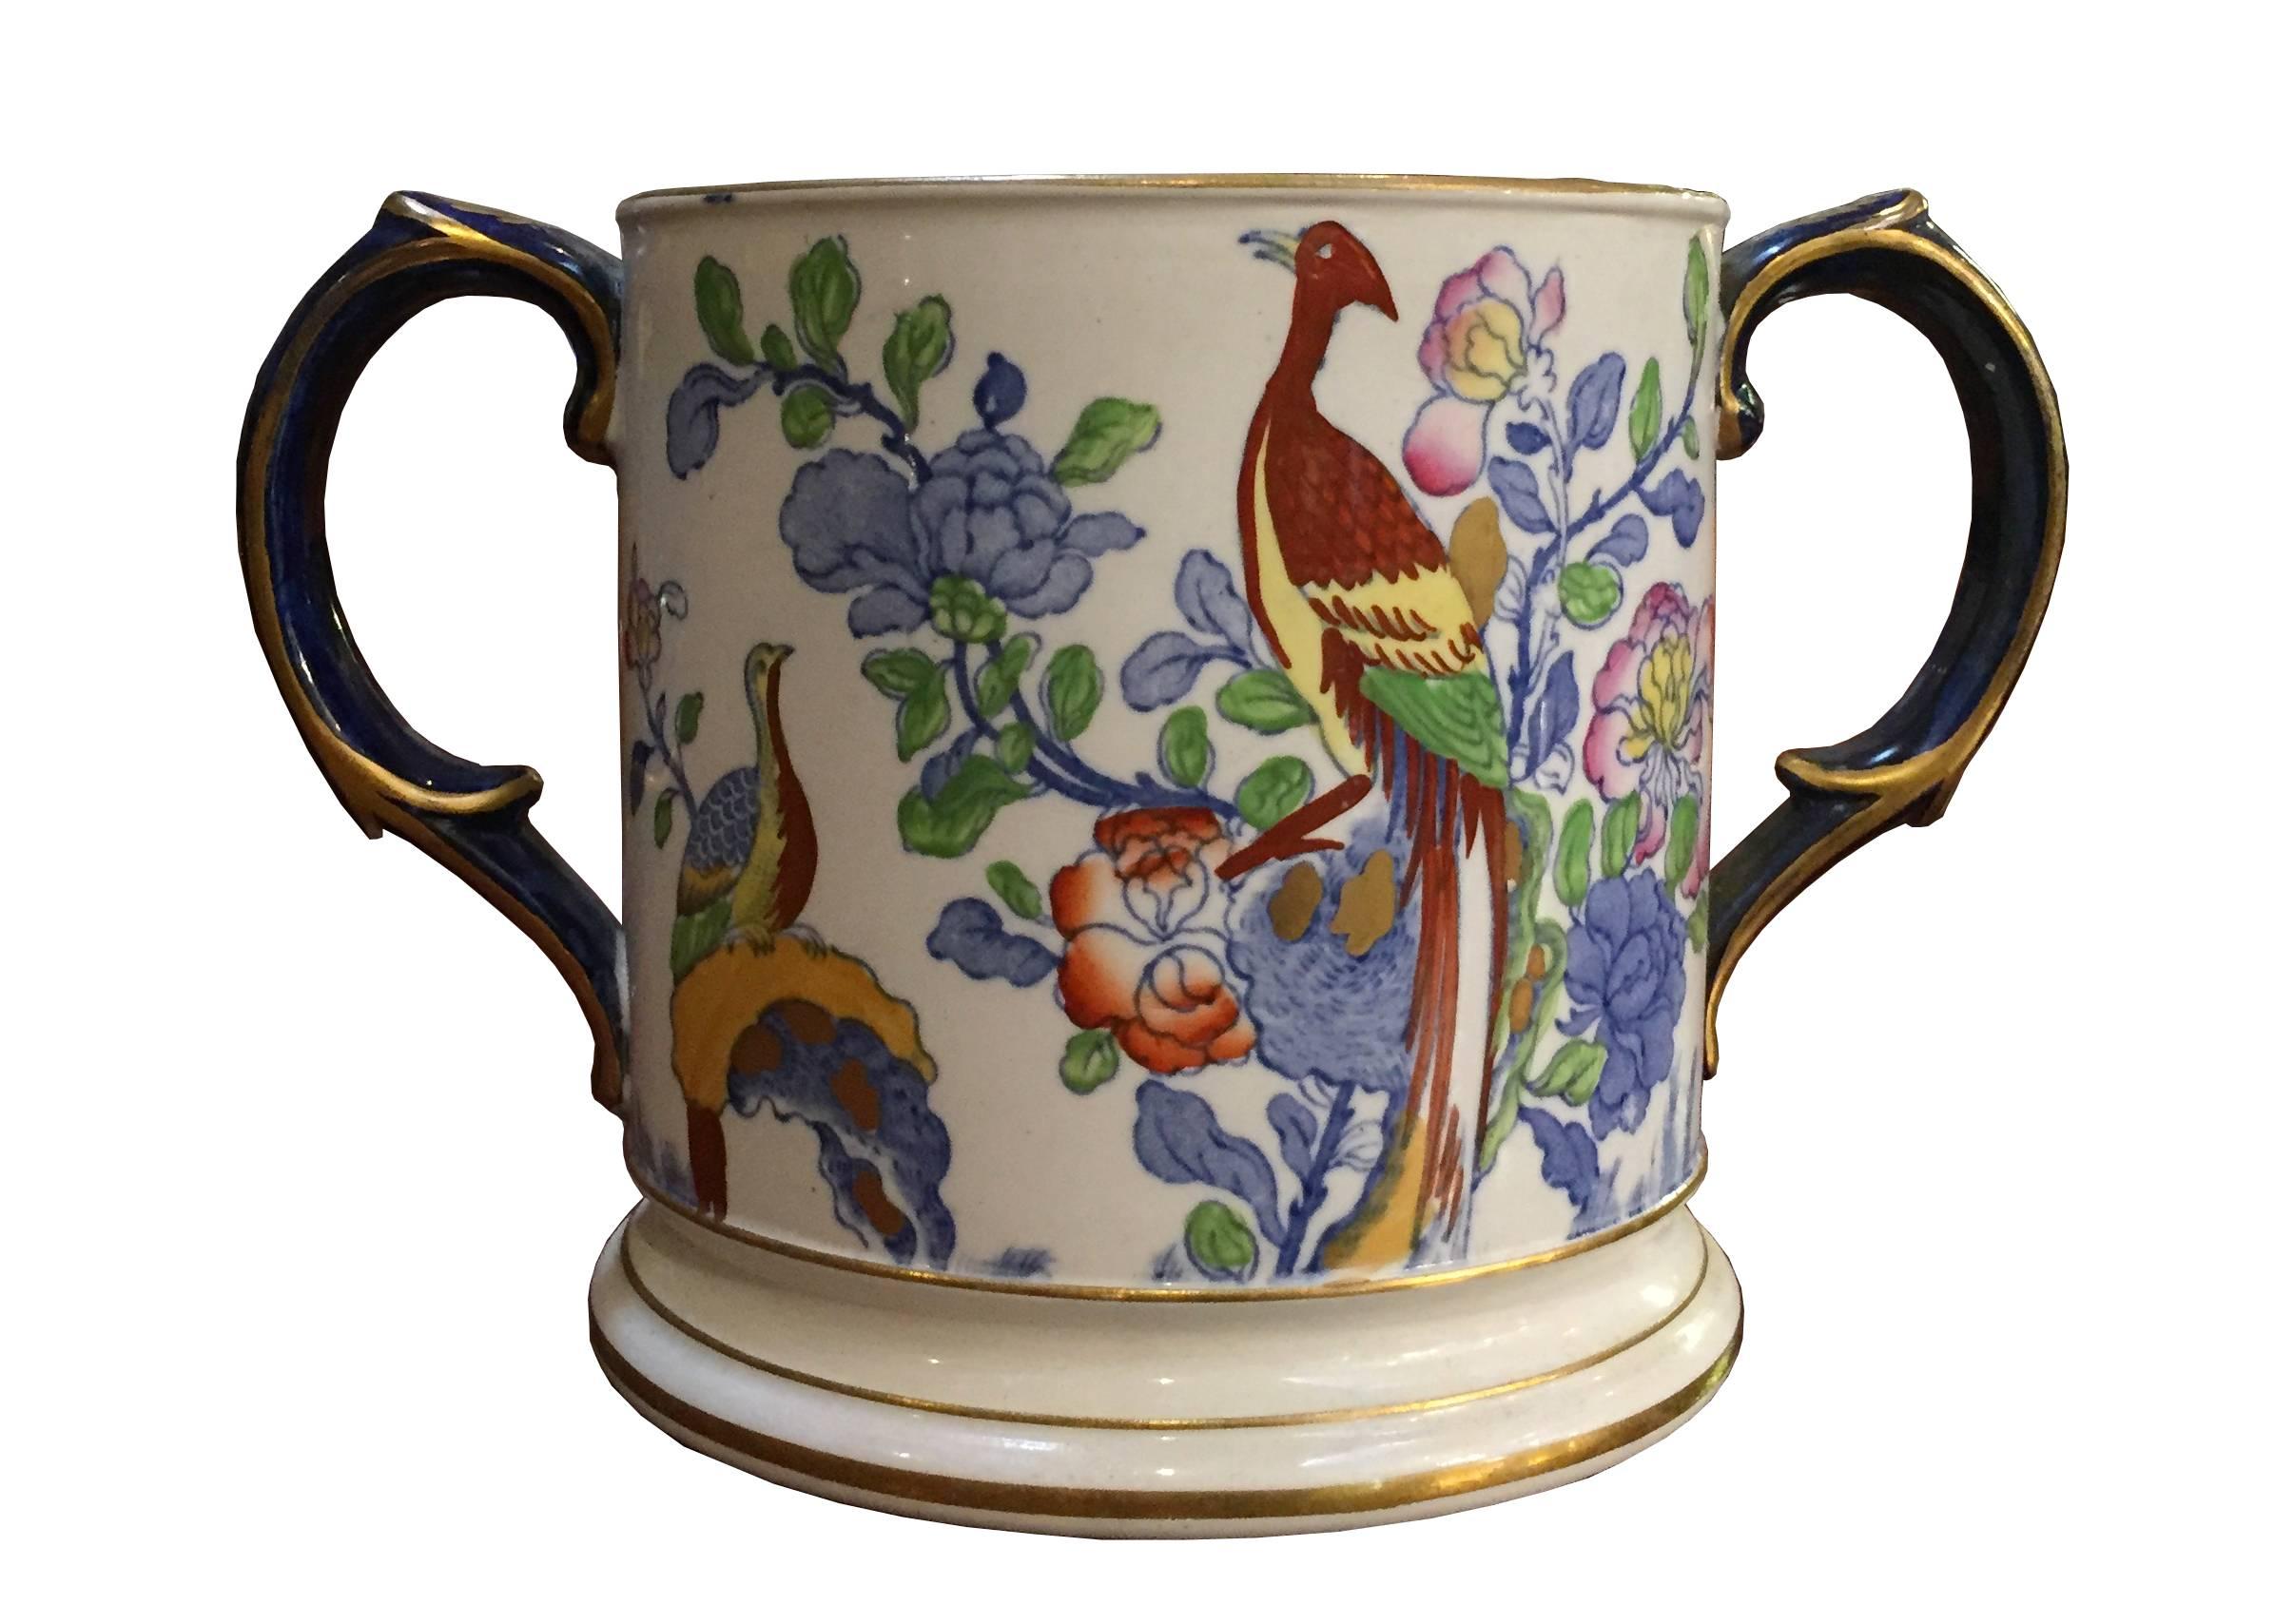 Decorated with flowers, birds and foliage.

Measures: Diameter 13cms
Height 13cms
width across handles 22cms.